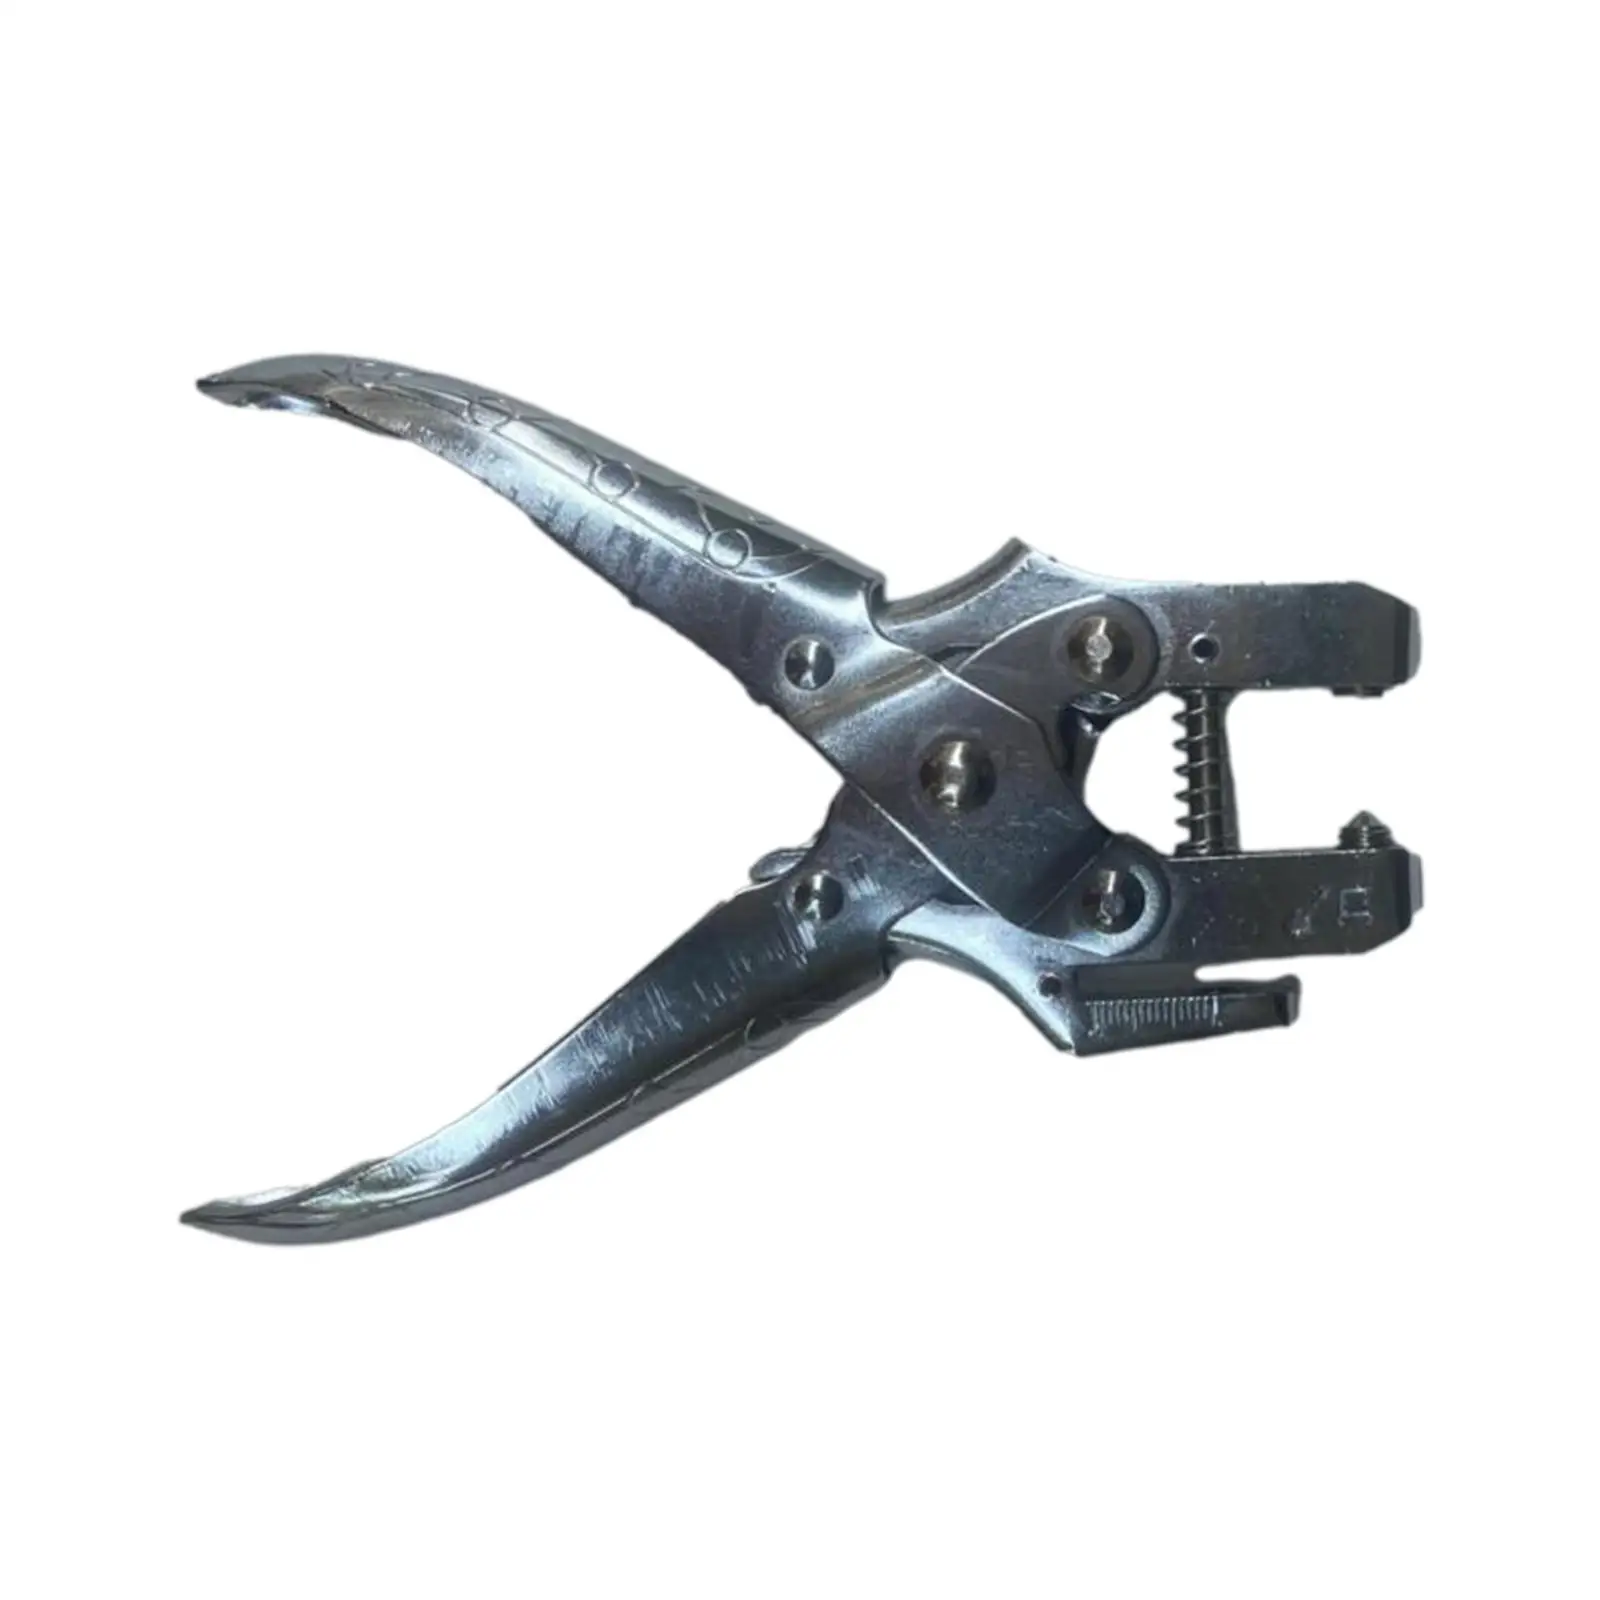 Stainless Steel Pliers for Badminton Racket, Grommet Tool, Racquet Racket Threading Pincer Forceps